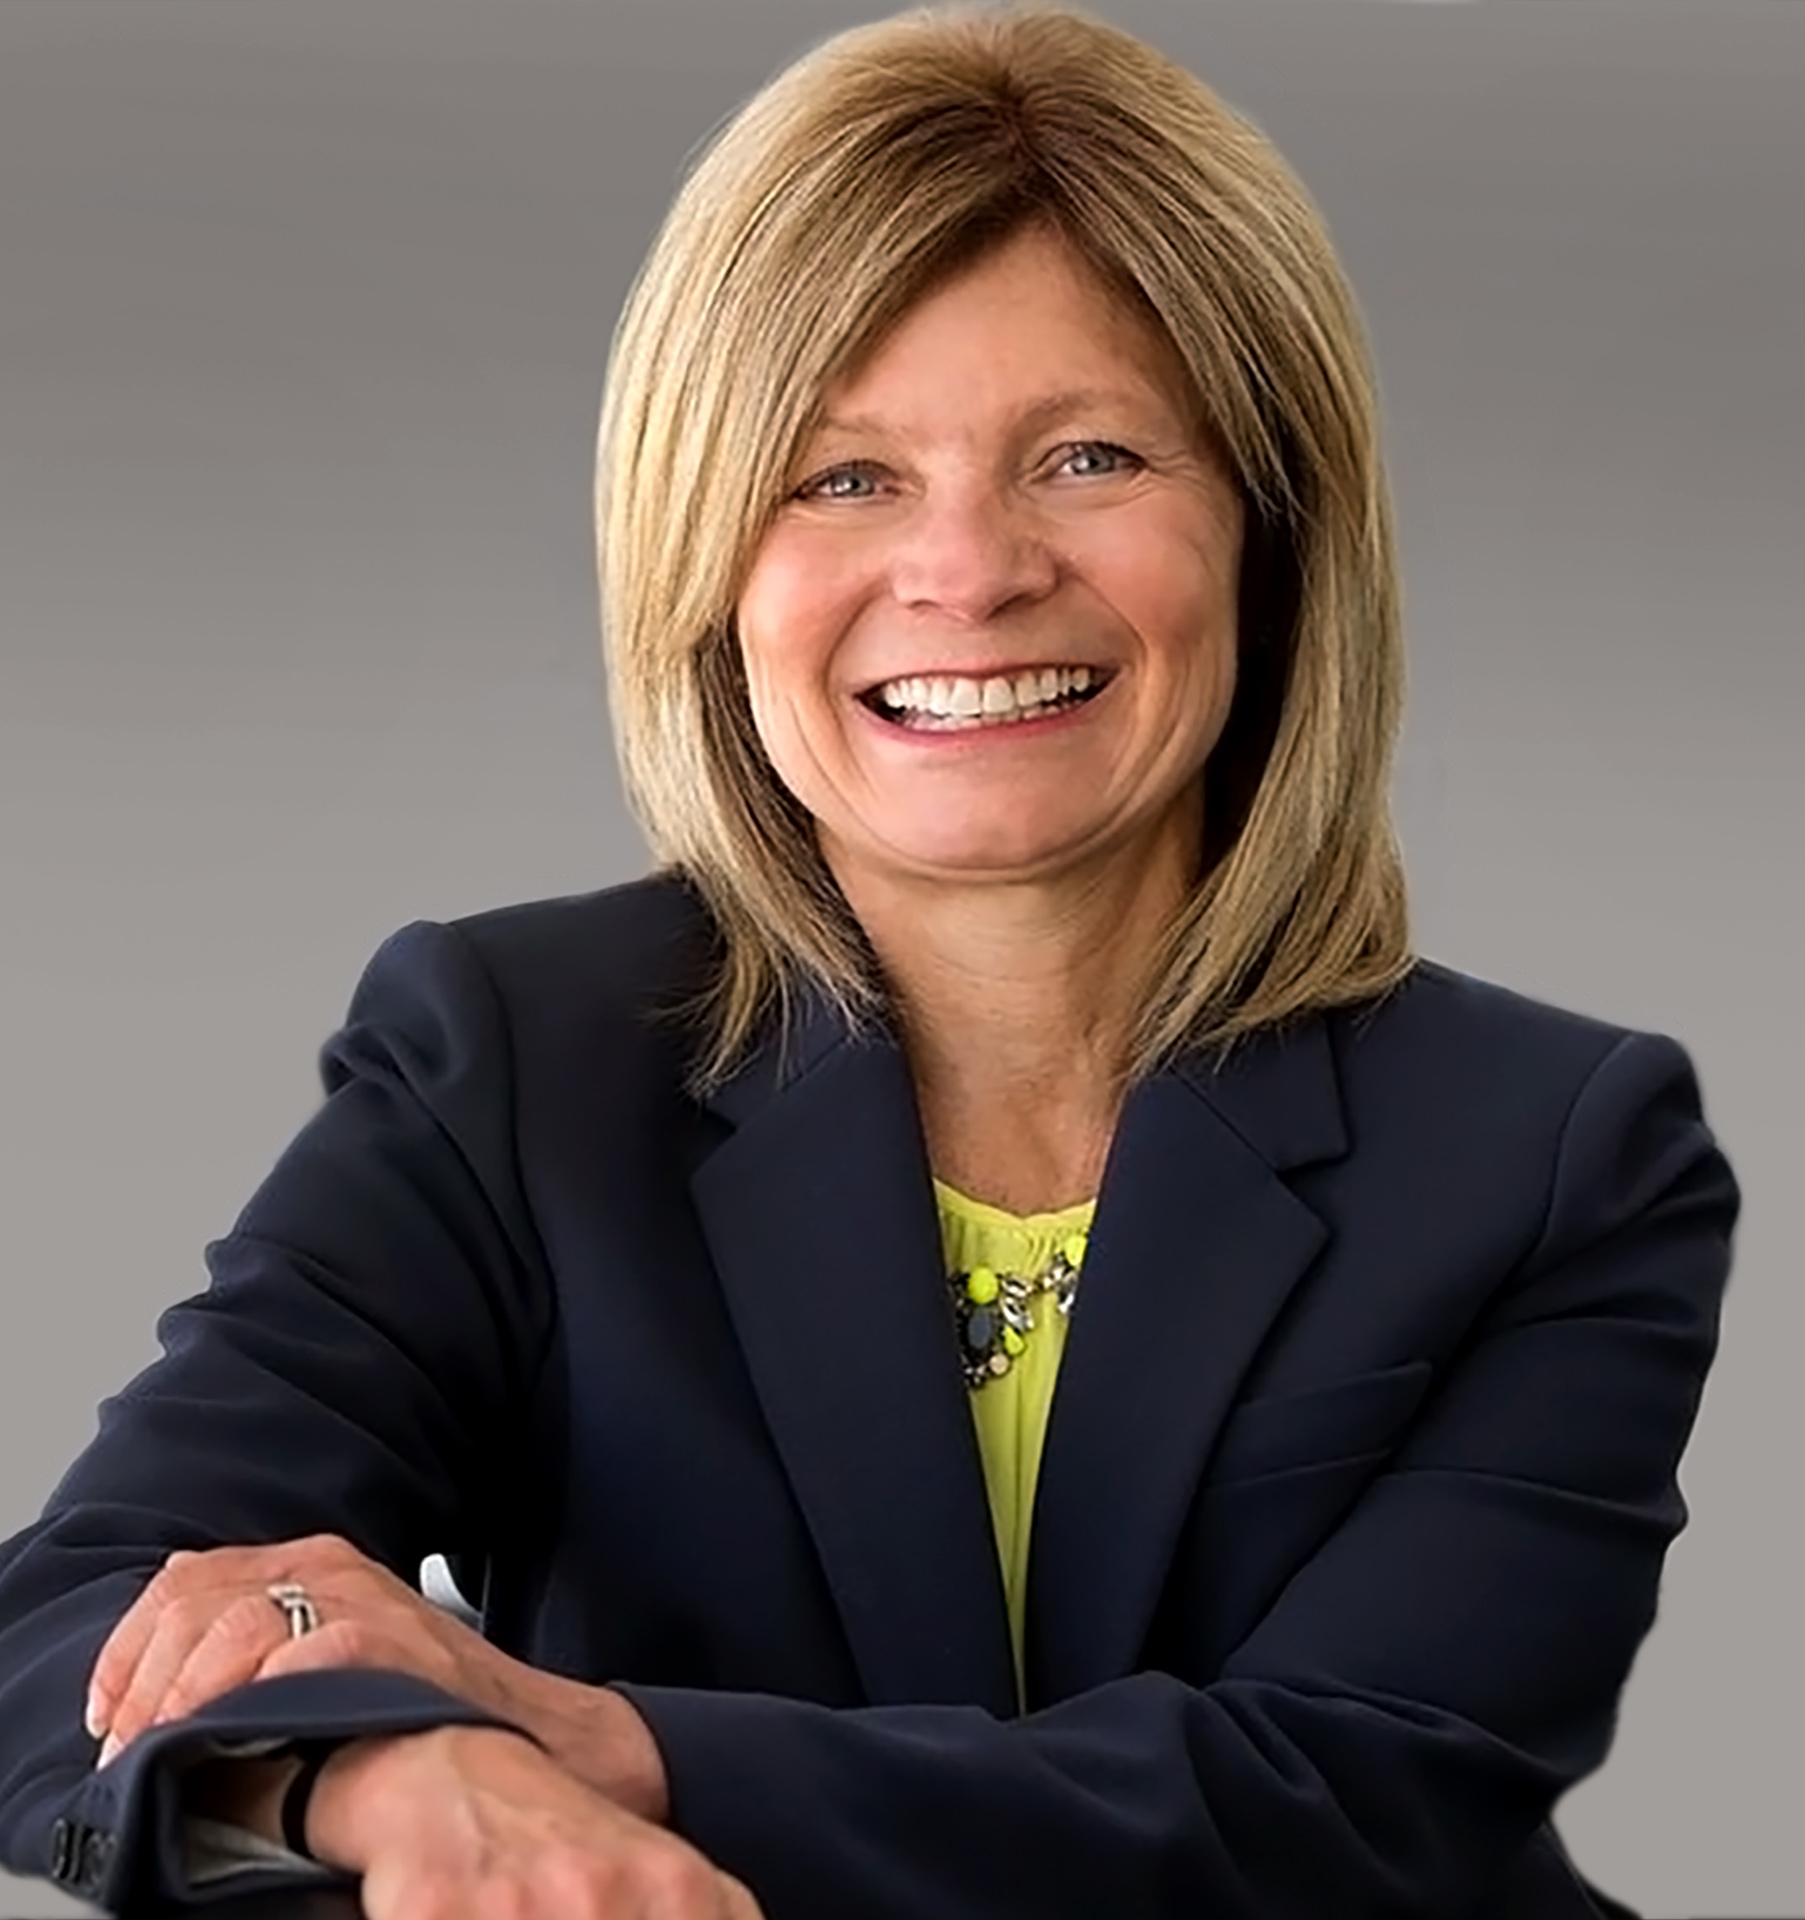 Cerence Adds Former Ford Executive Marcy Klevorn to its Board of Directors